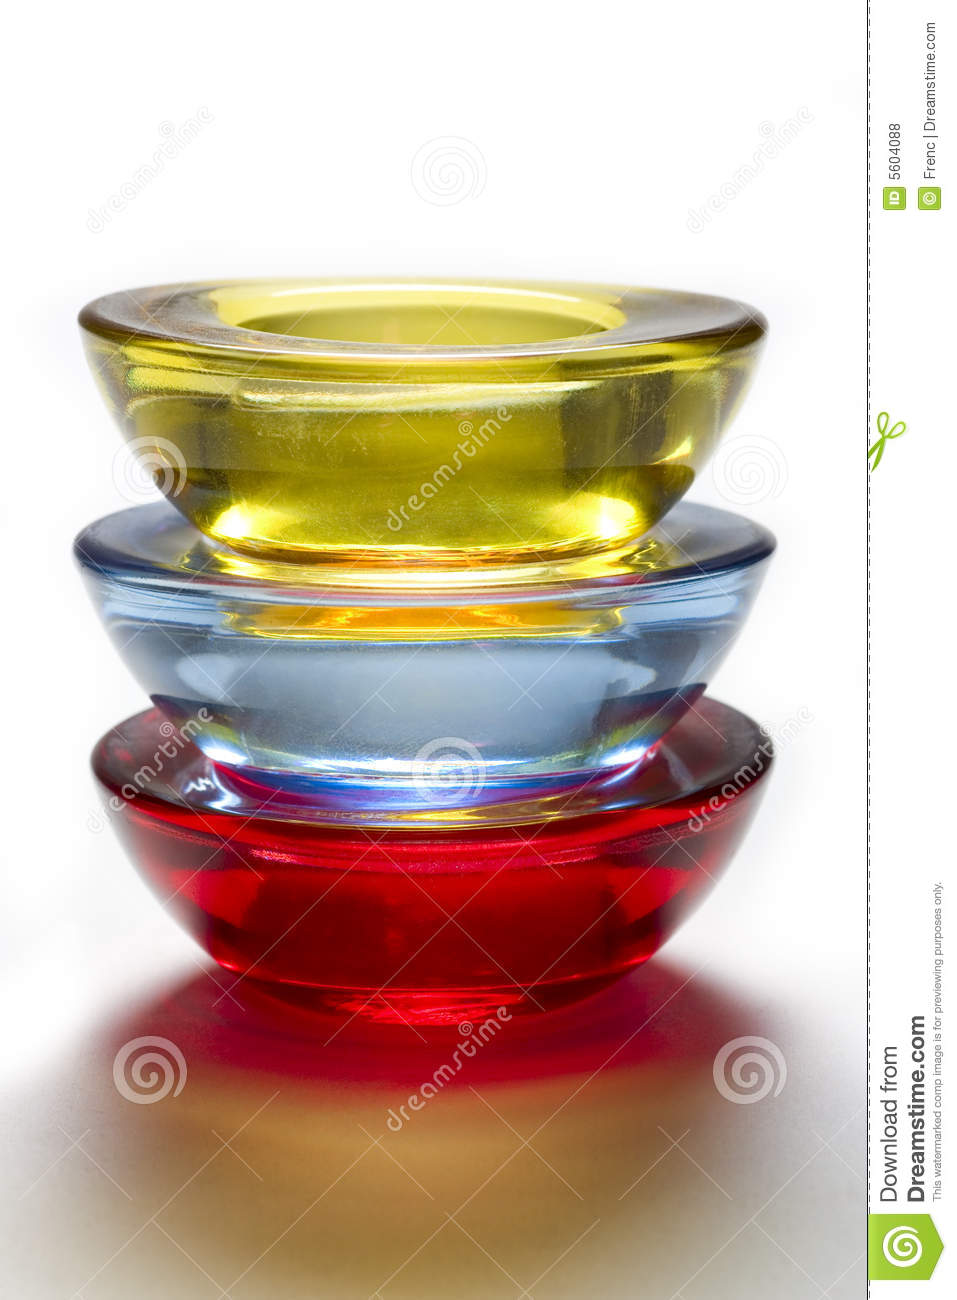 Colorful Tea Light Candle Holder Royalty Free Stock Photos   Image